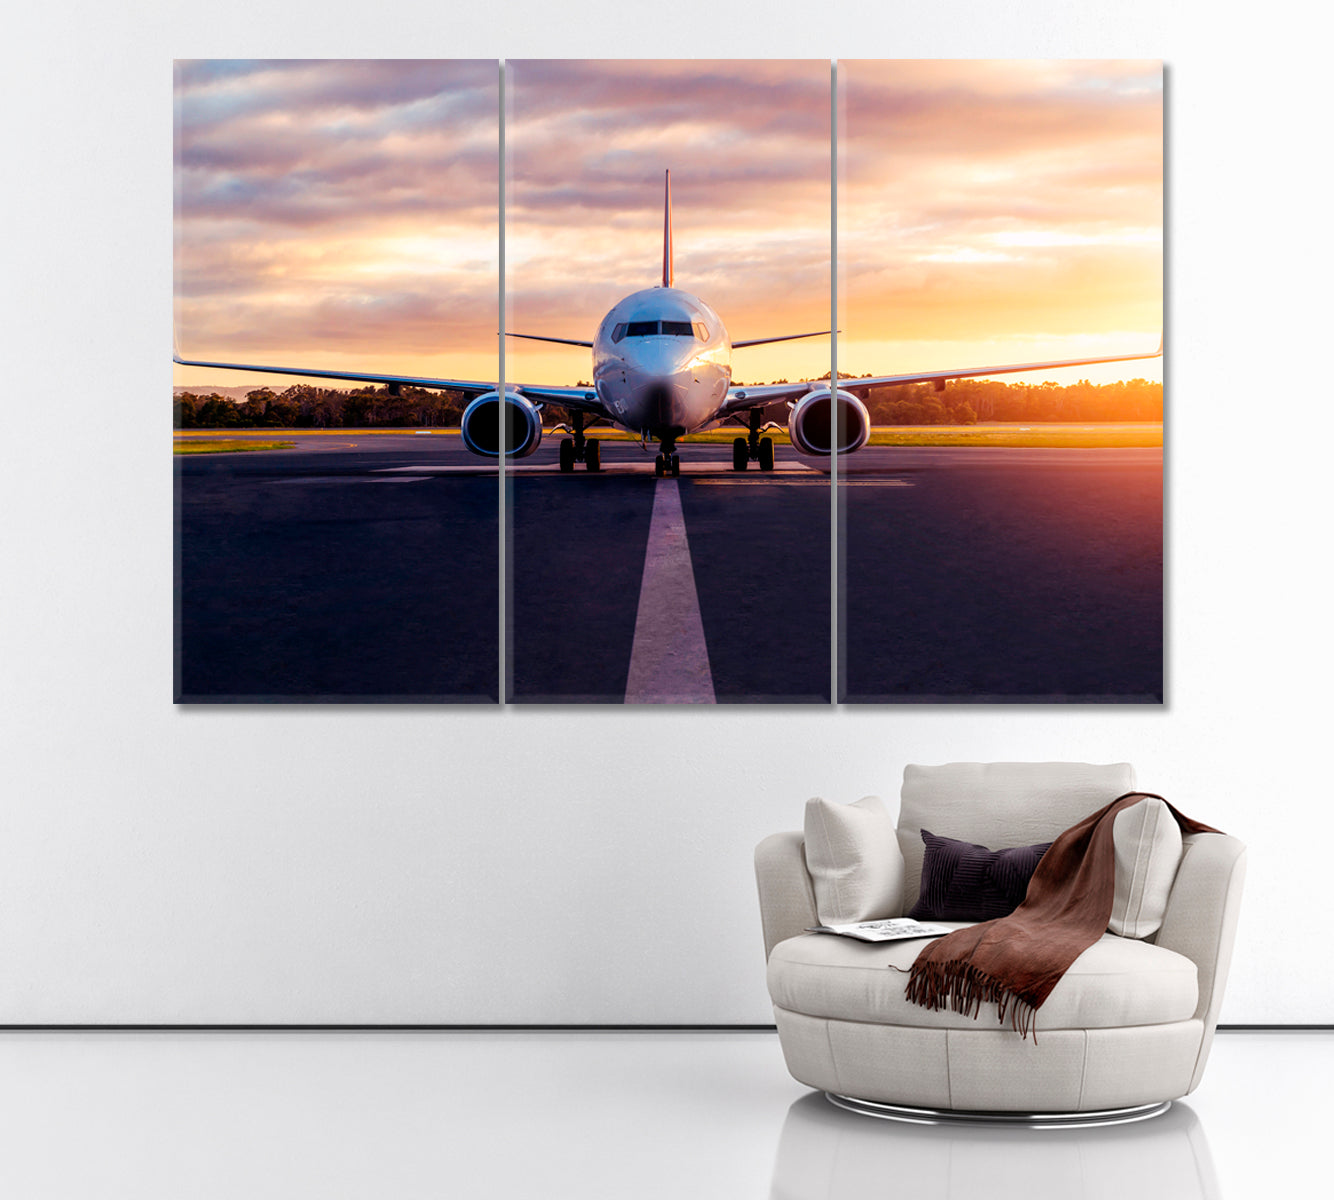 Airplane on Runway Canvas Print ArtLexy 3 Panels 36"x24" inches 